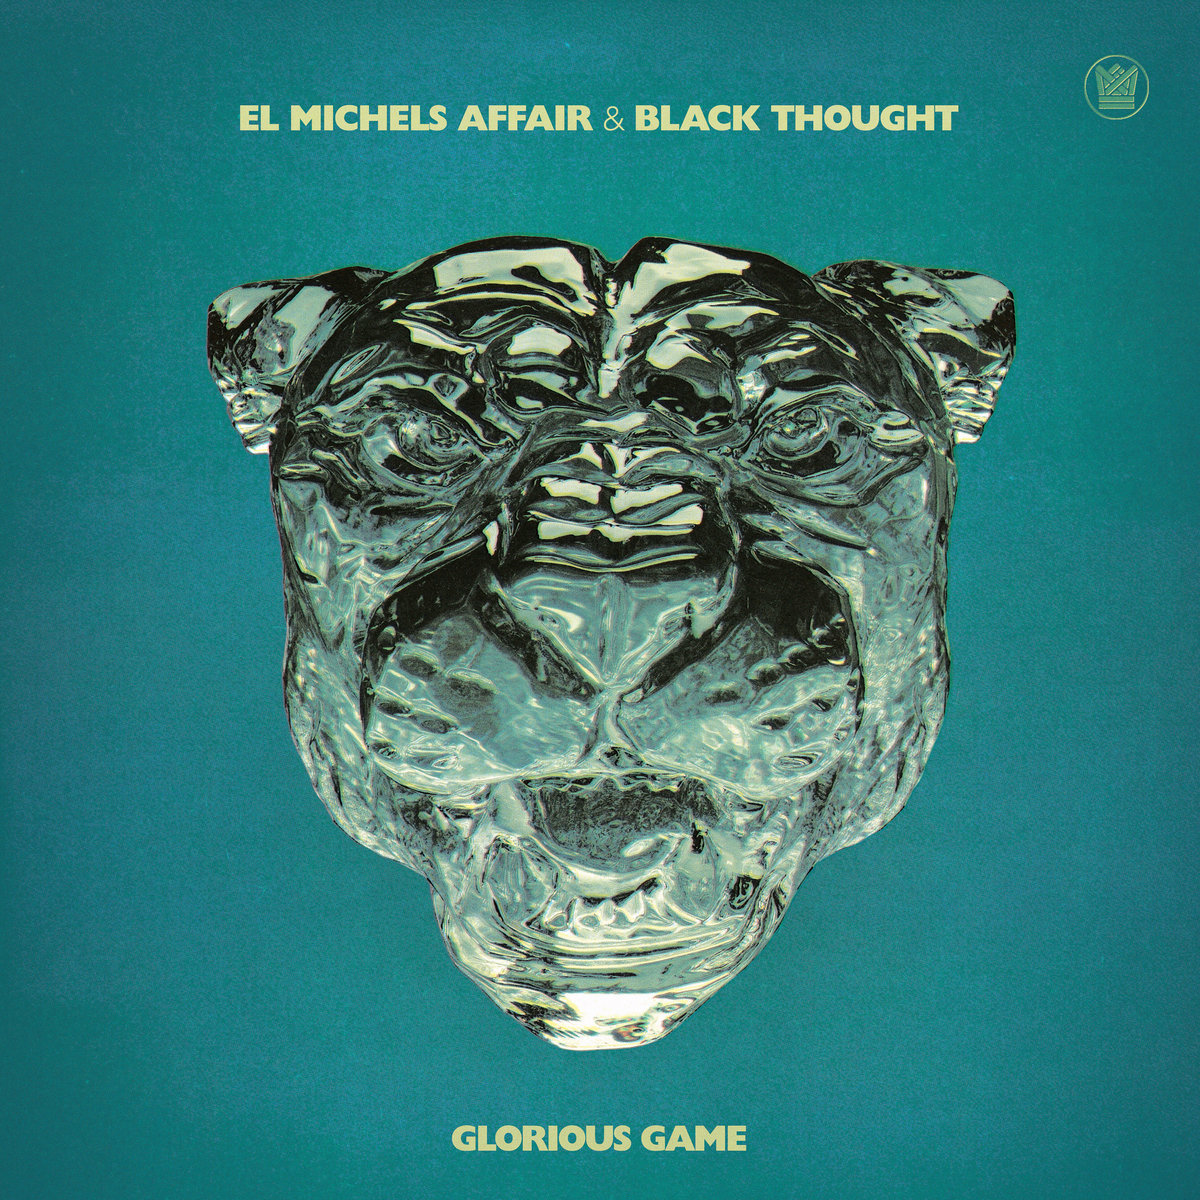 El_michels_affair___black_thought_glorious_game